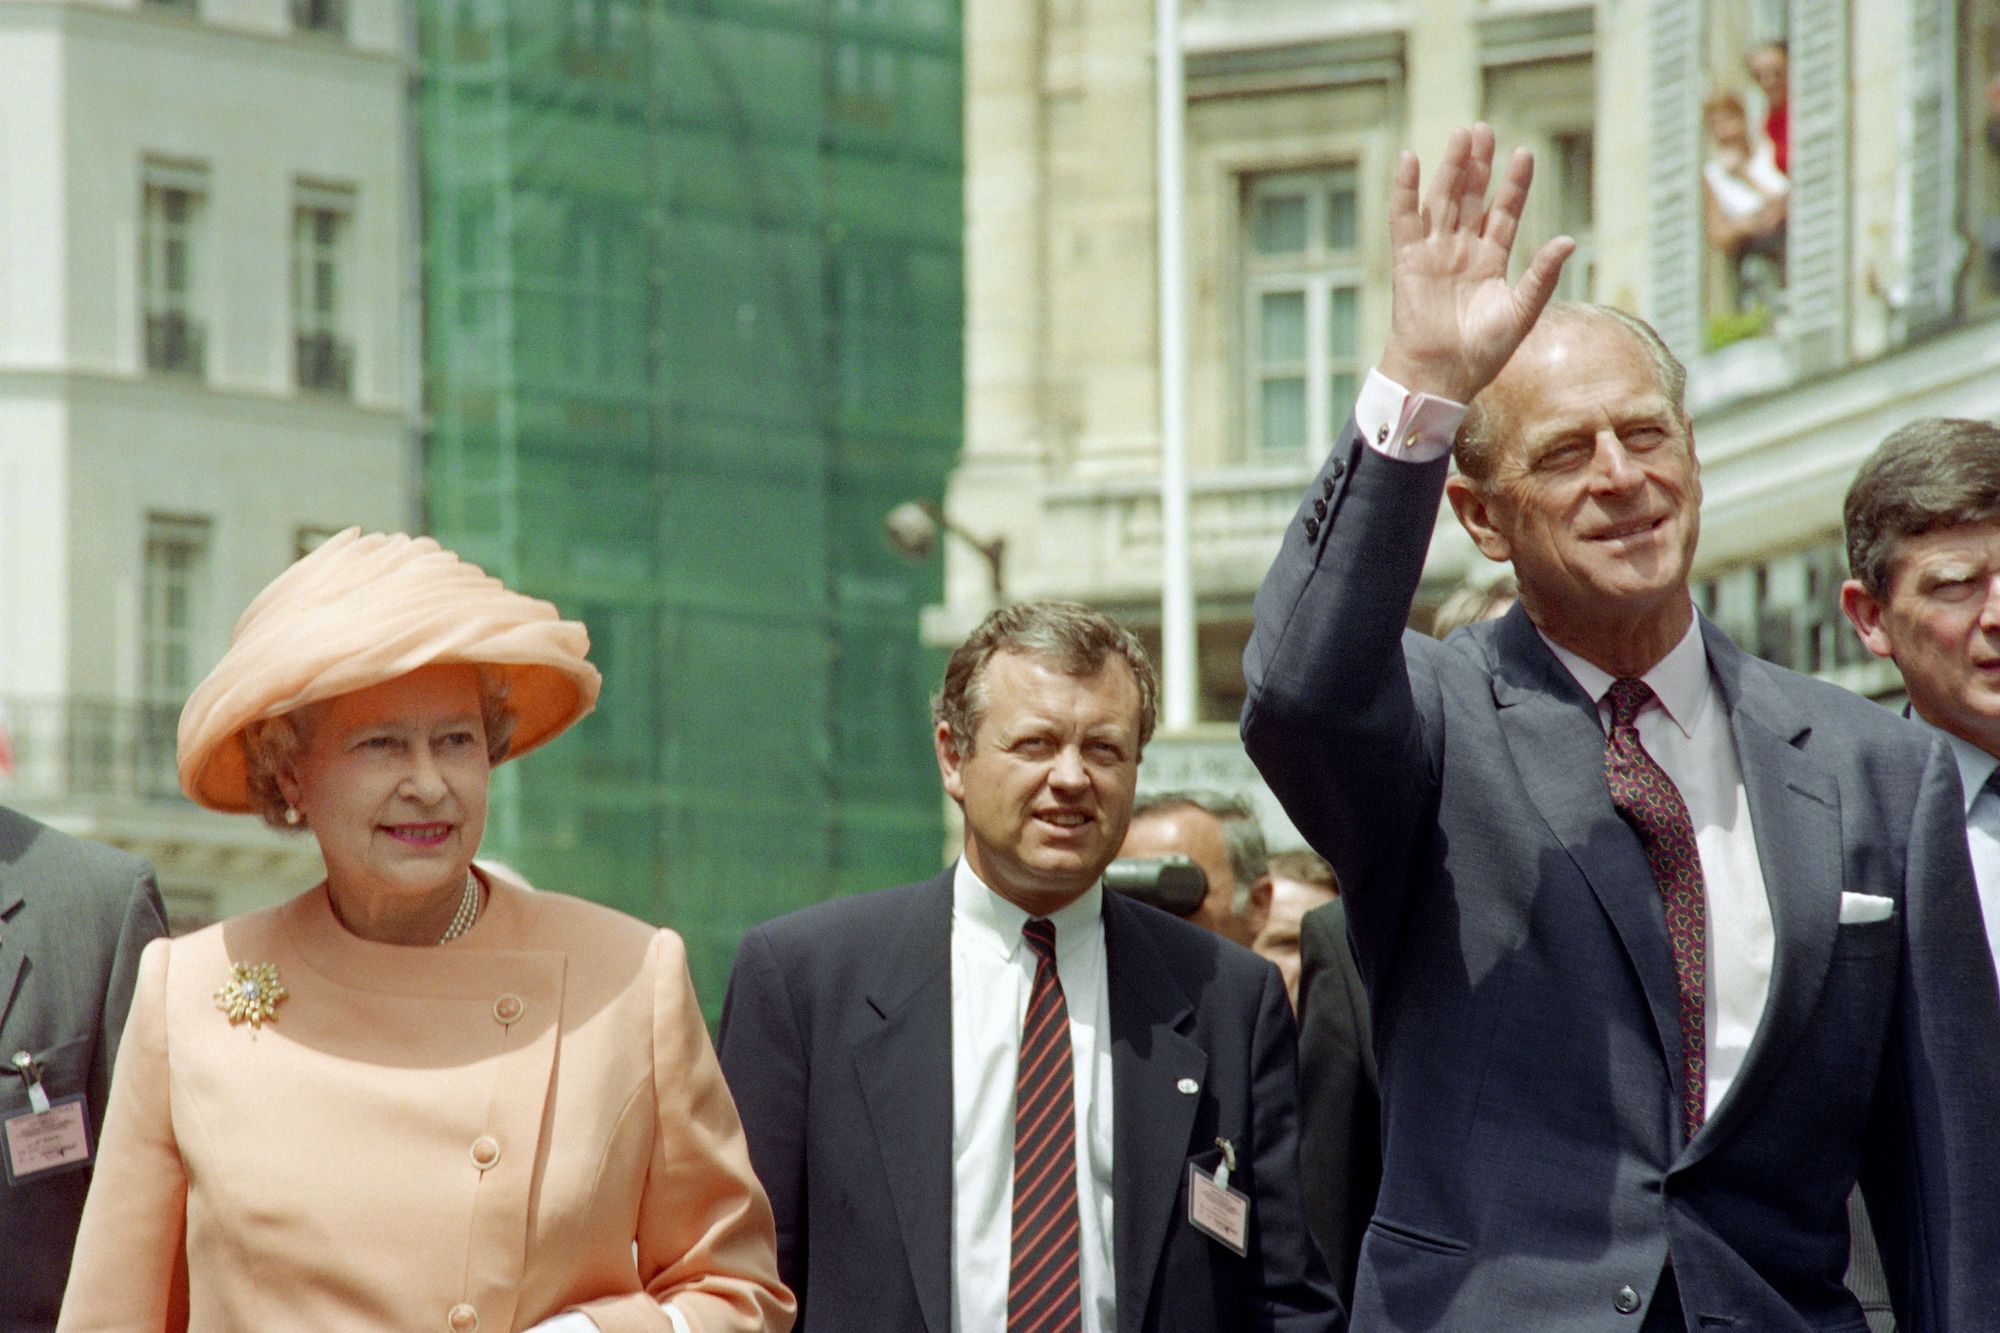 Queen Elizabeth II and Prince Philip wave as they walk to the Elysee Palace in Paris on June 9, 1992